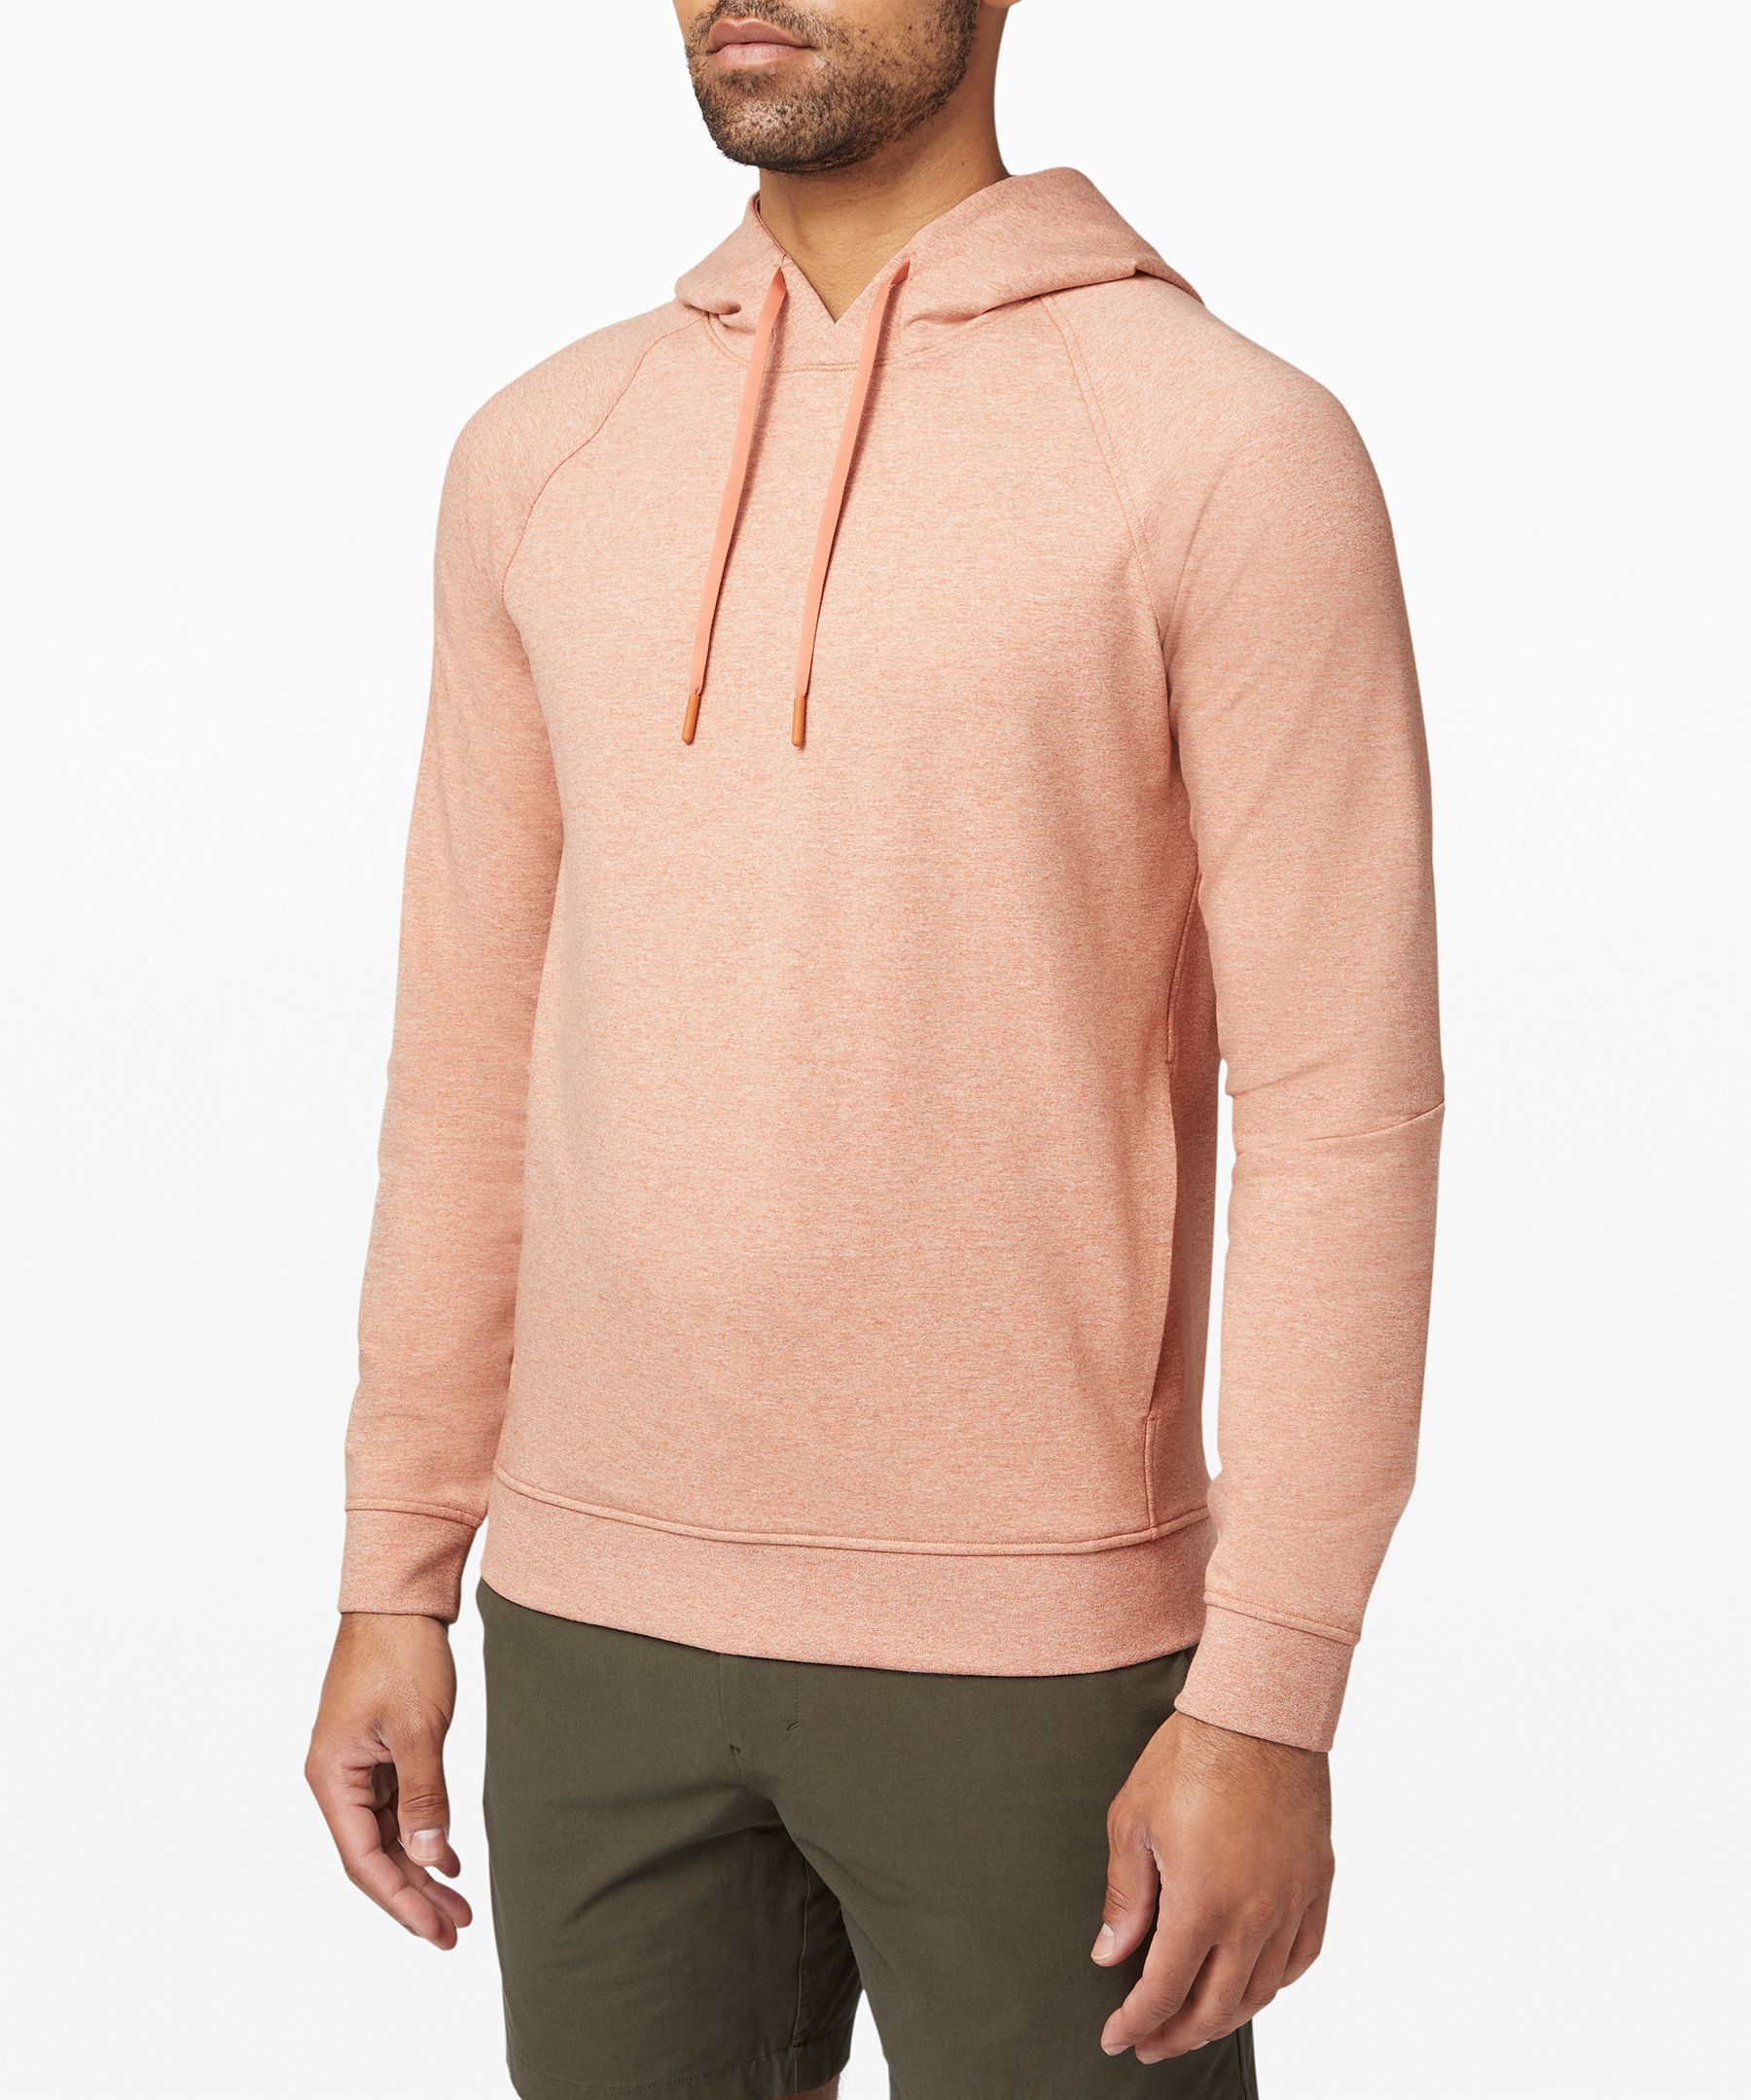 Lululemon City Sweat Pullover Hoodie French Terry In Orange